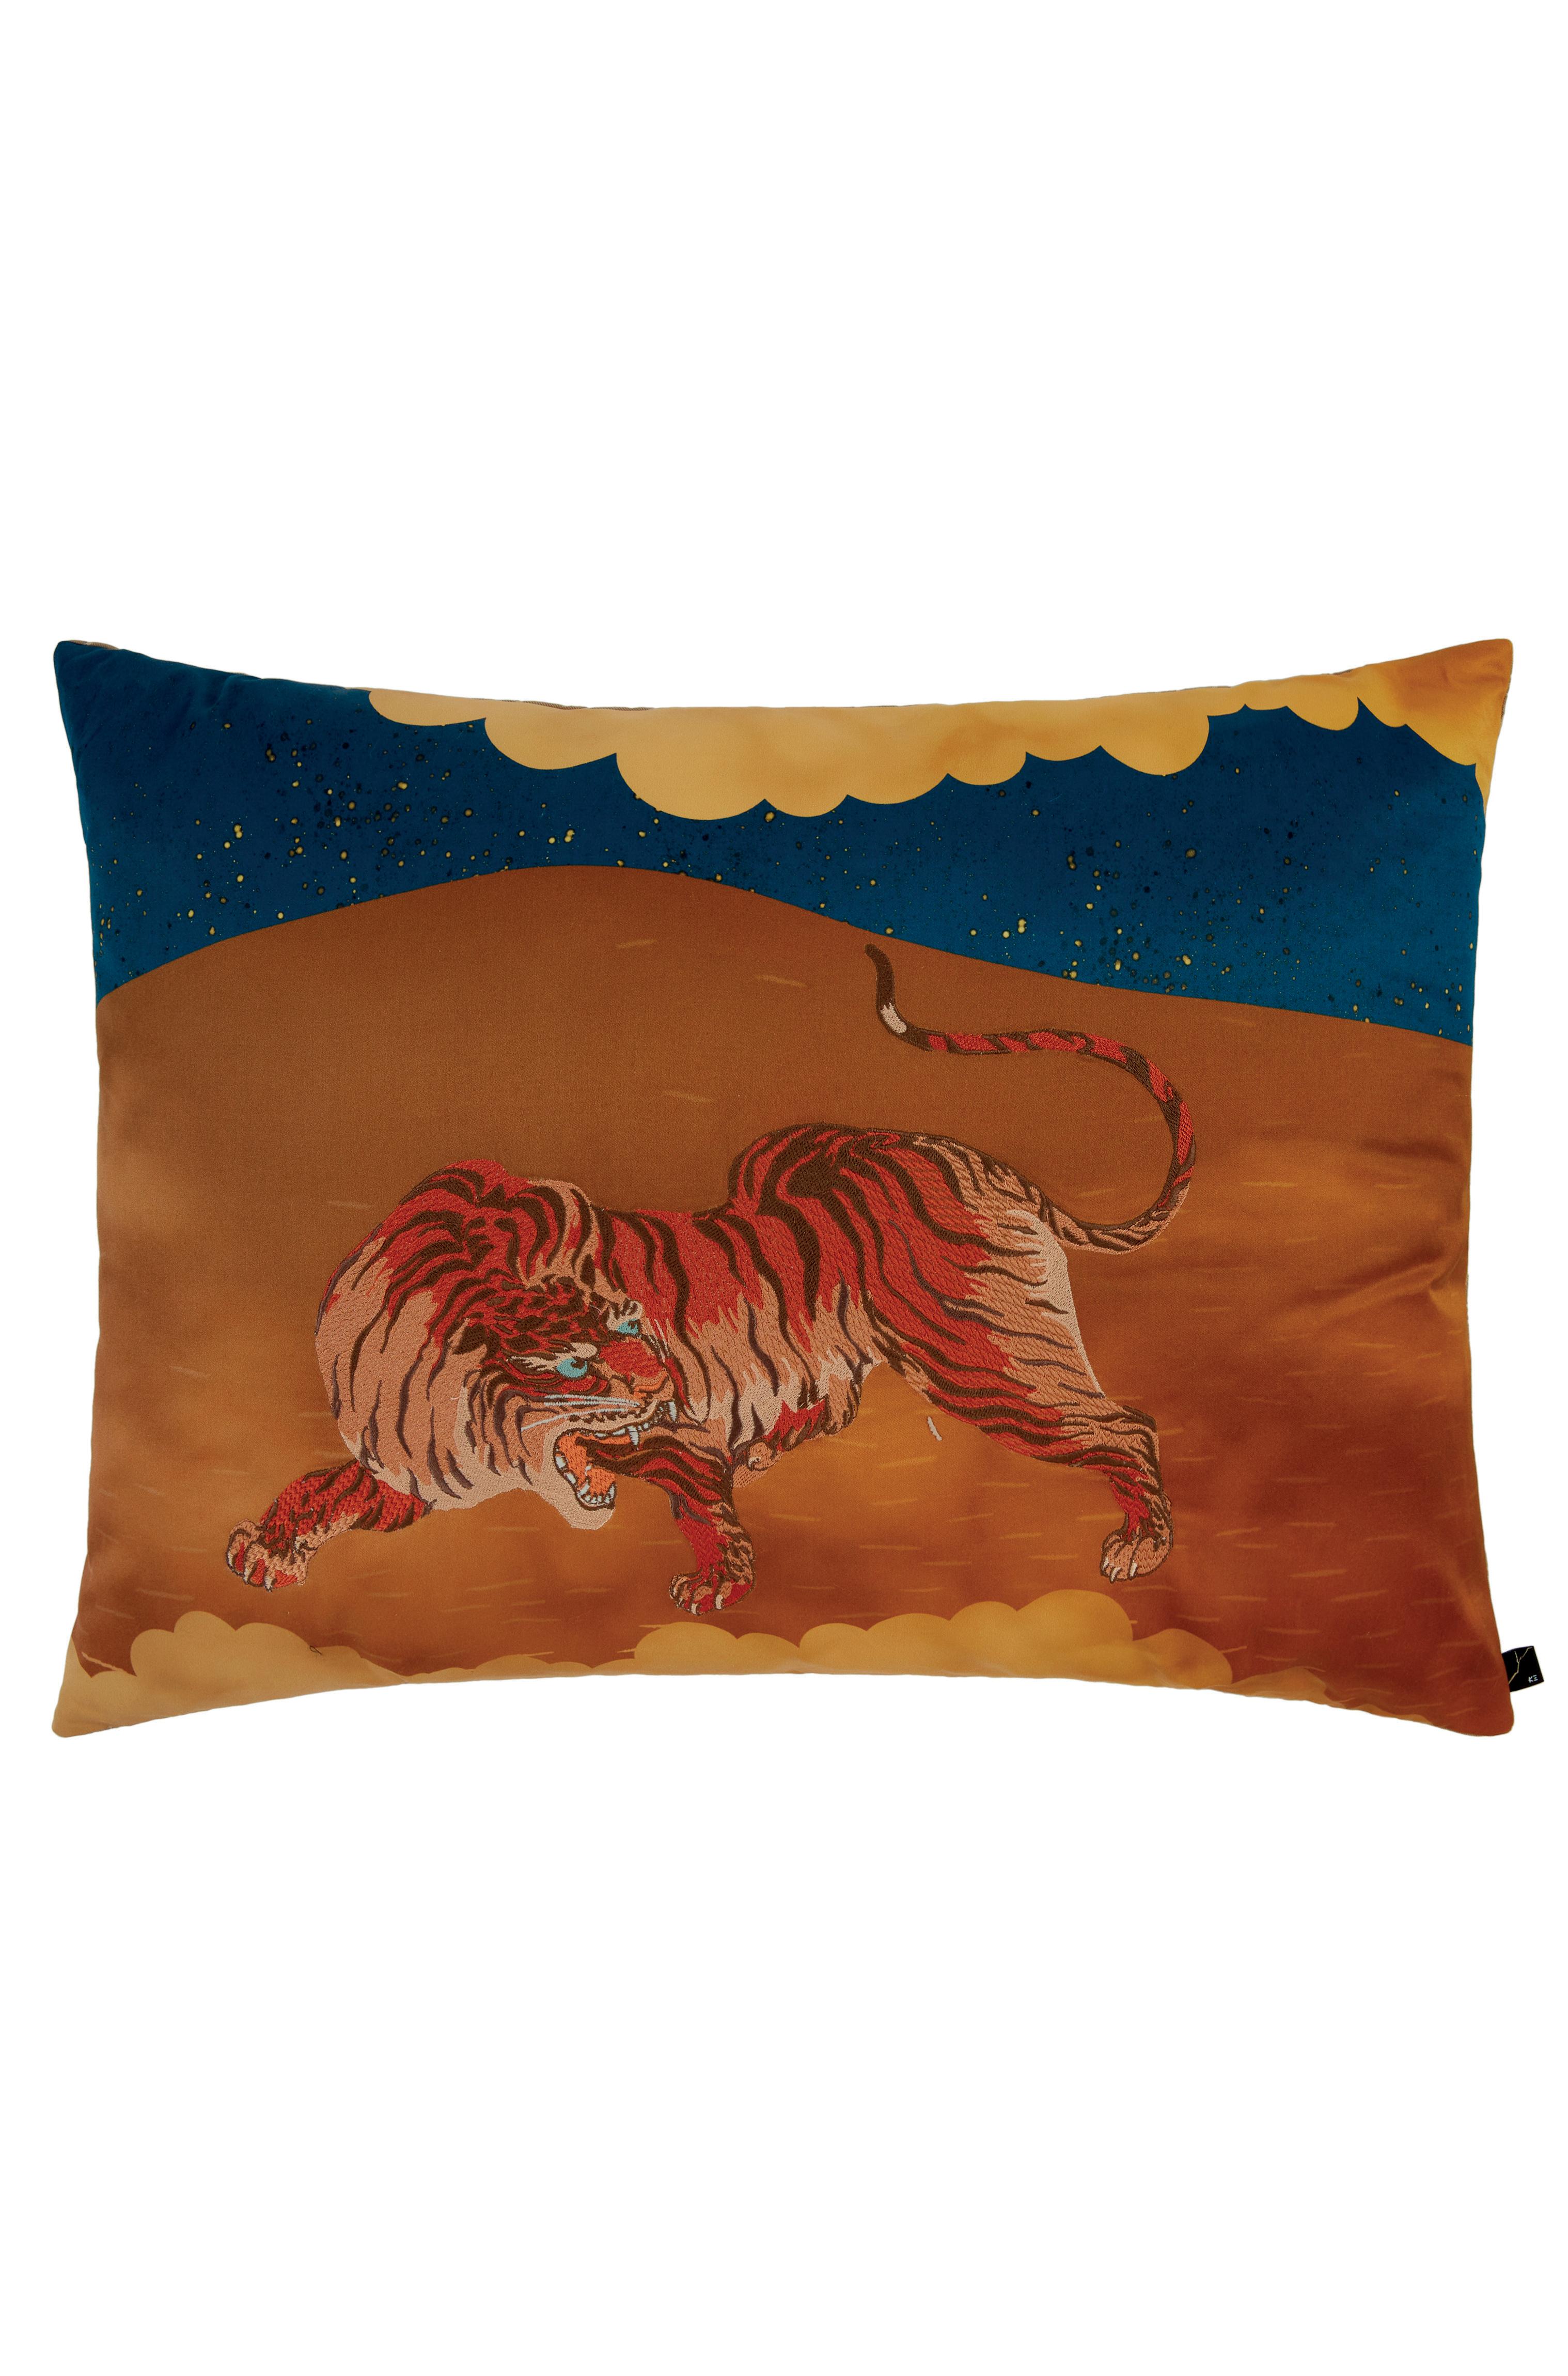 This is a rectangular cushion designed in natural orange and blue tones with a precious tiger embroidery. 
The tiger is a Japanese symbol of strength.
